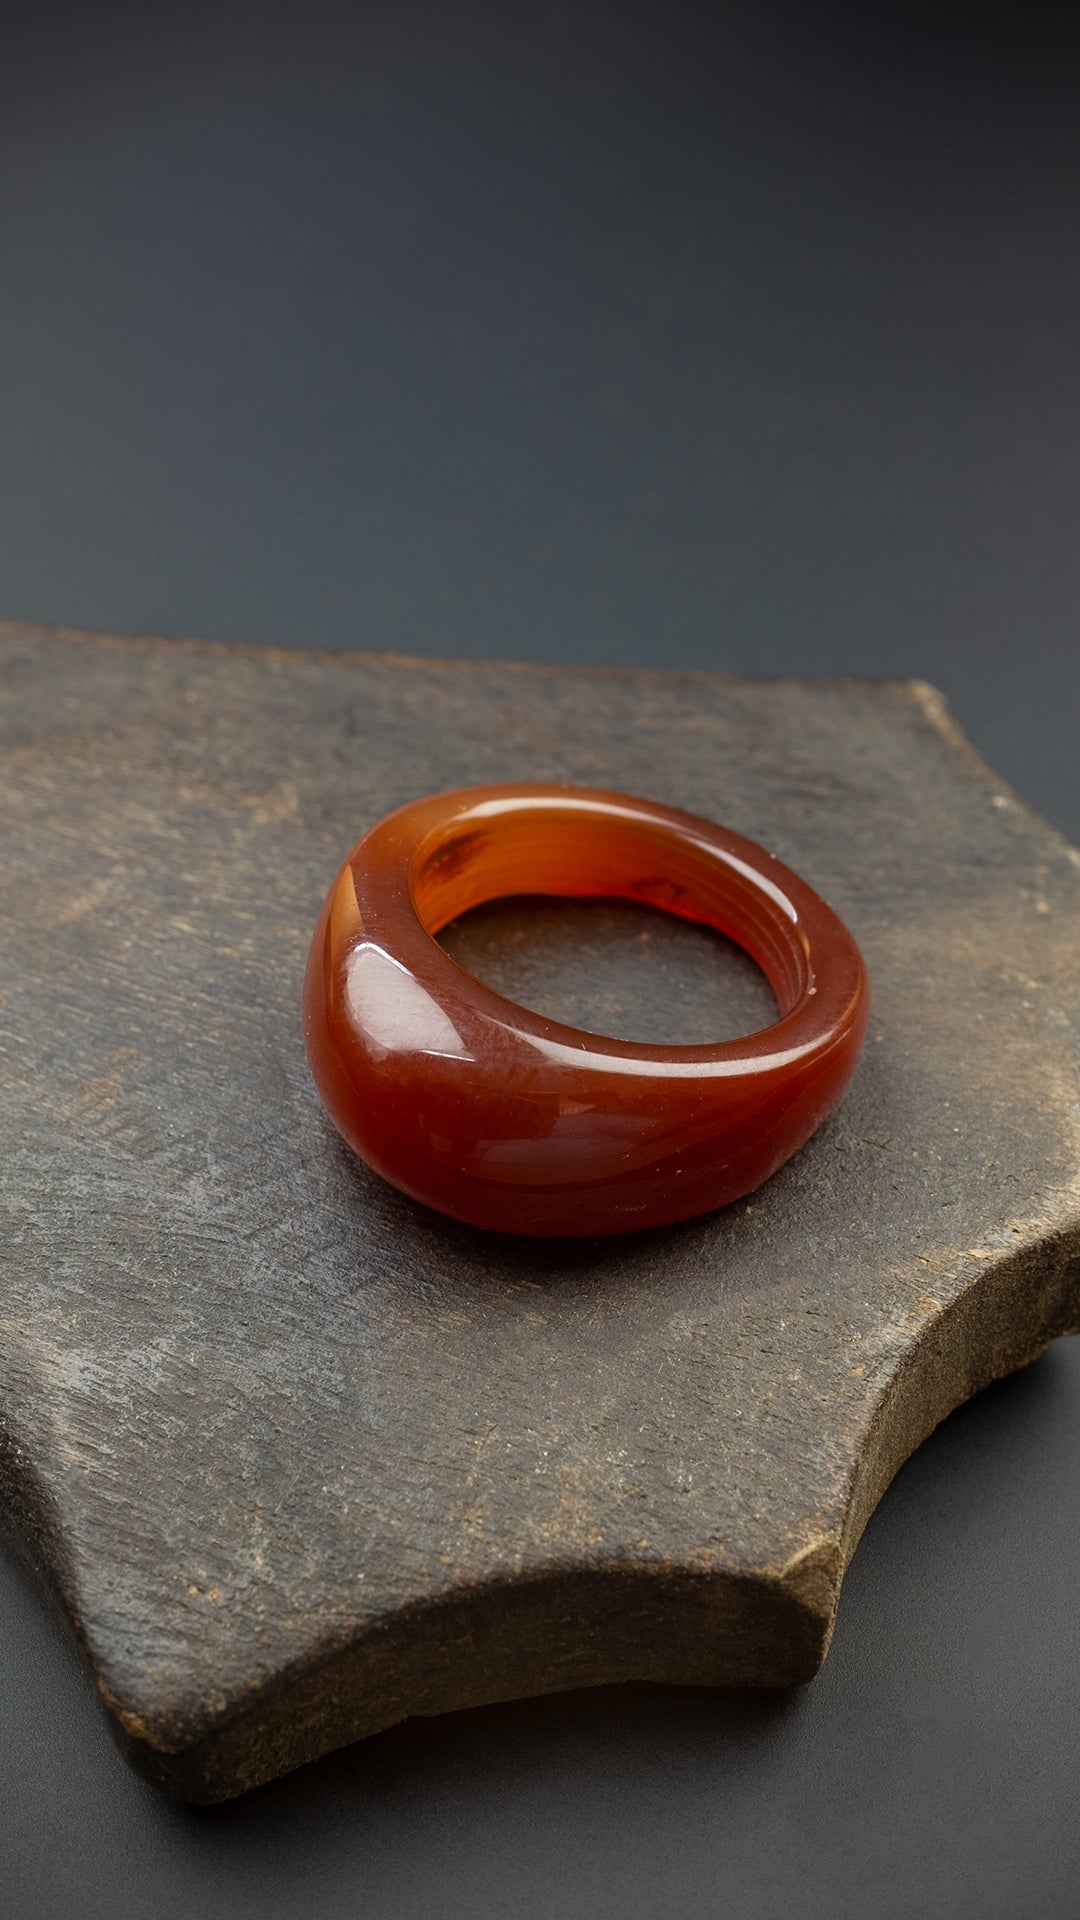 Agate ring, Morocco